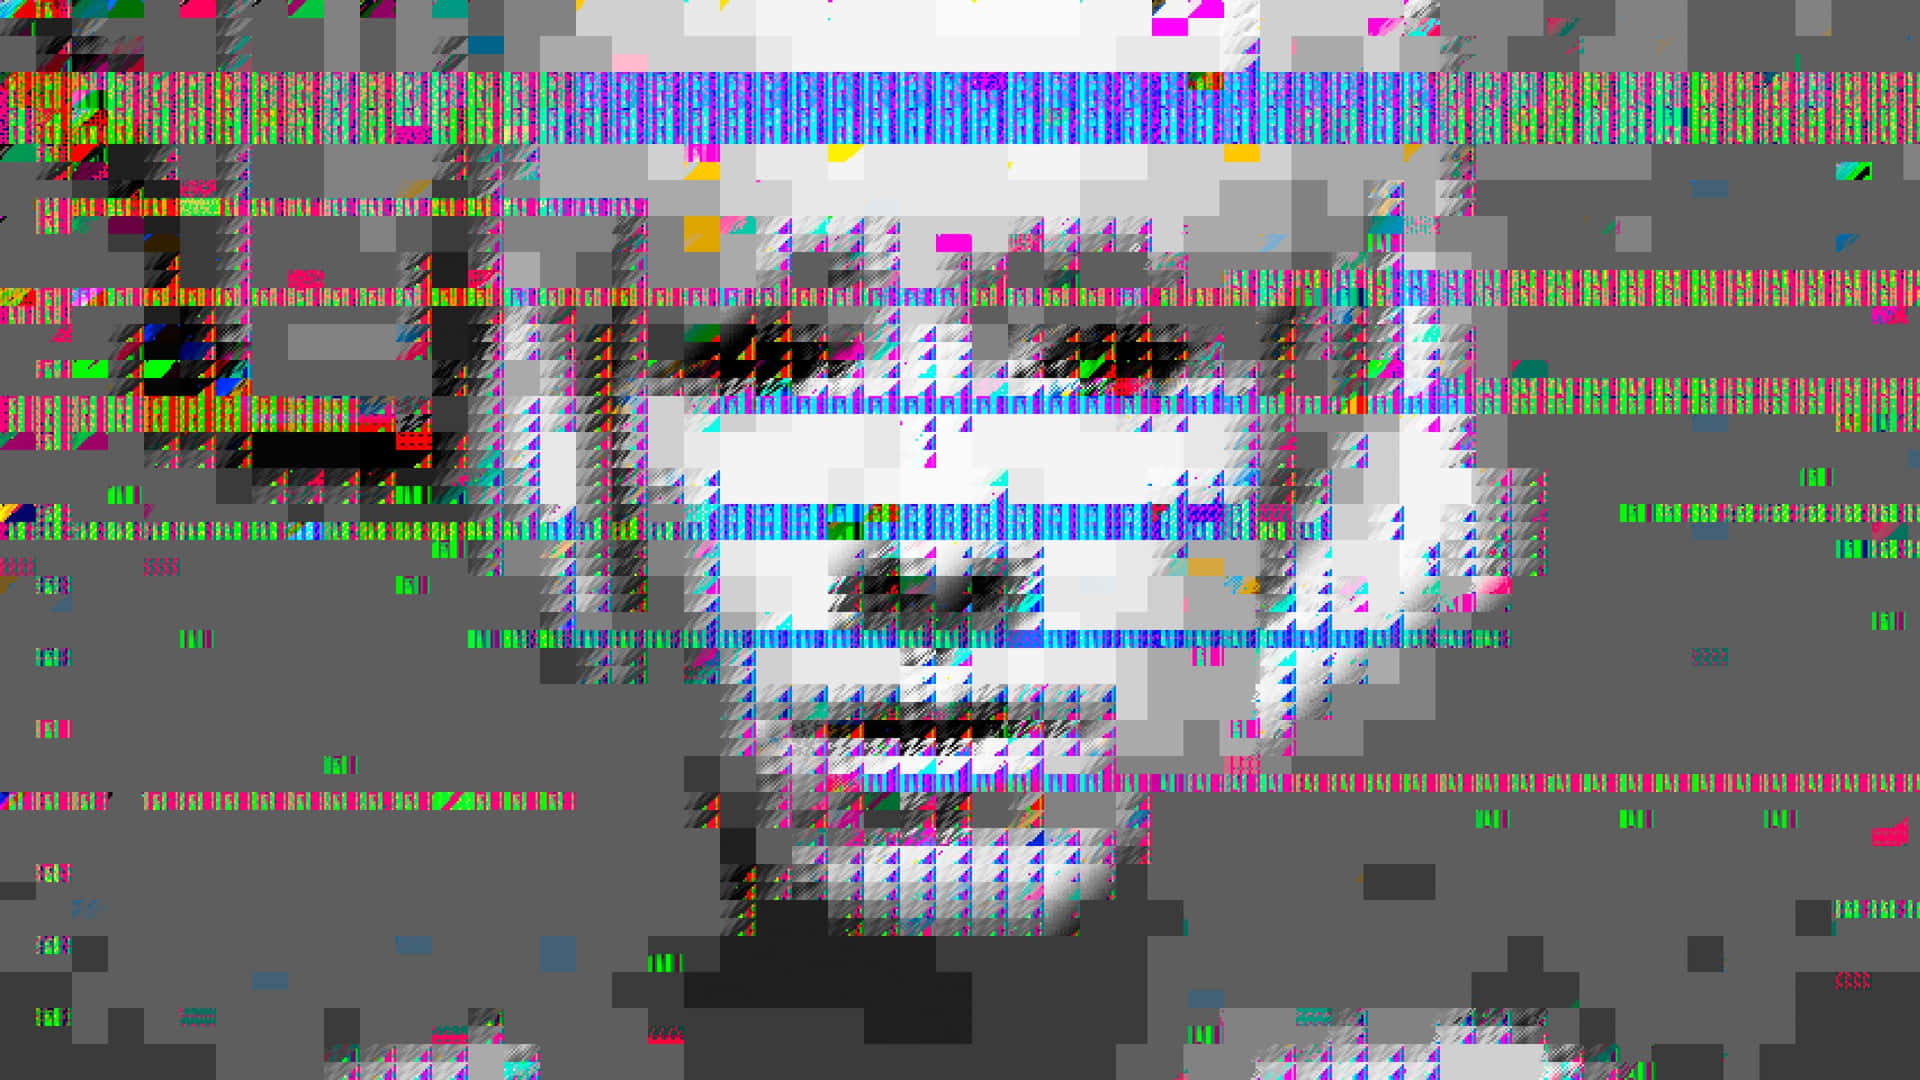 Download Get lost in the surreal world of Glitch | Wallpapers.com